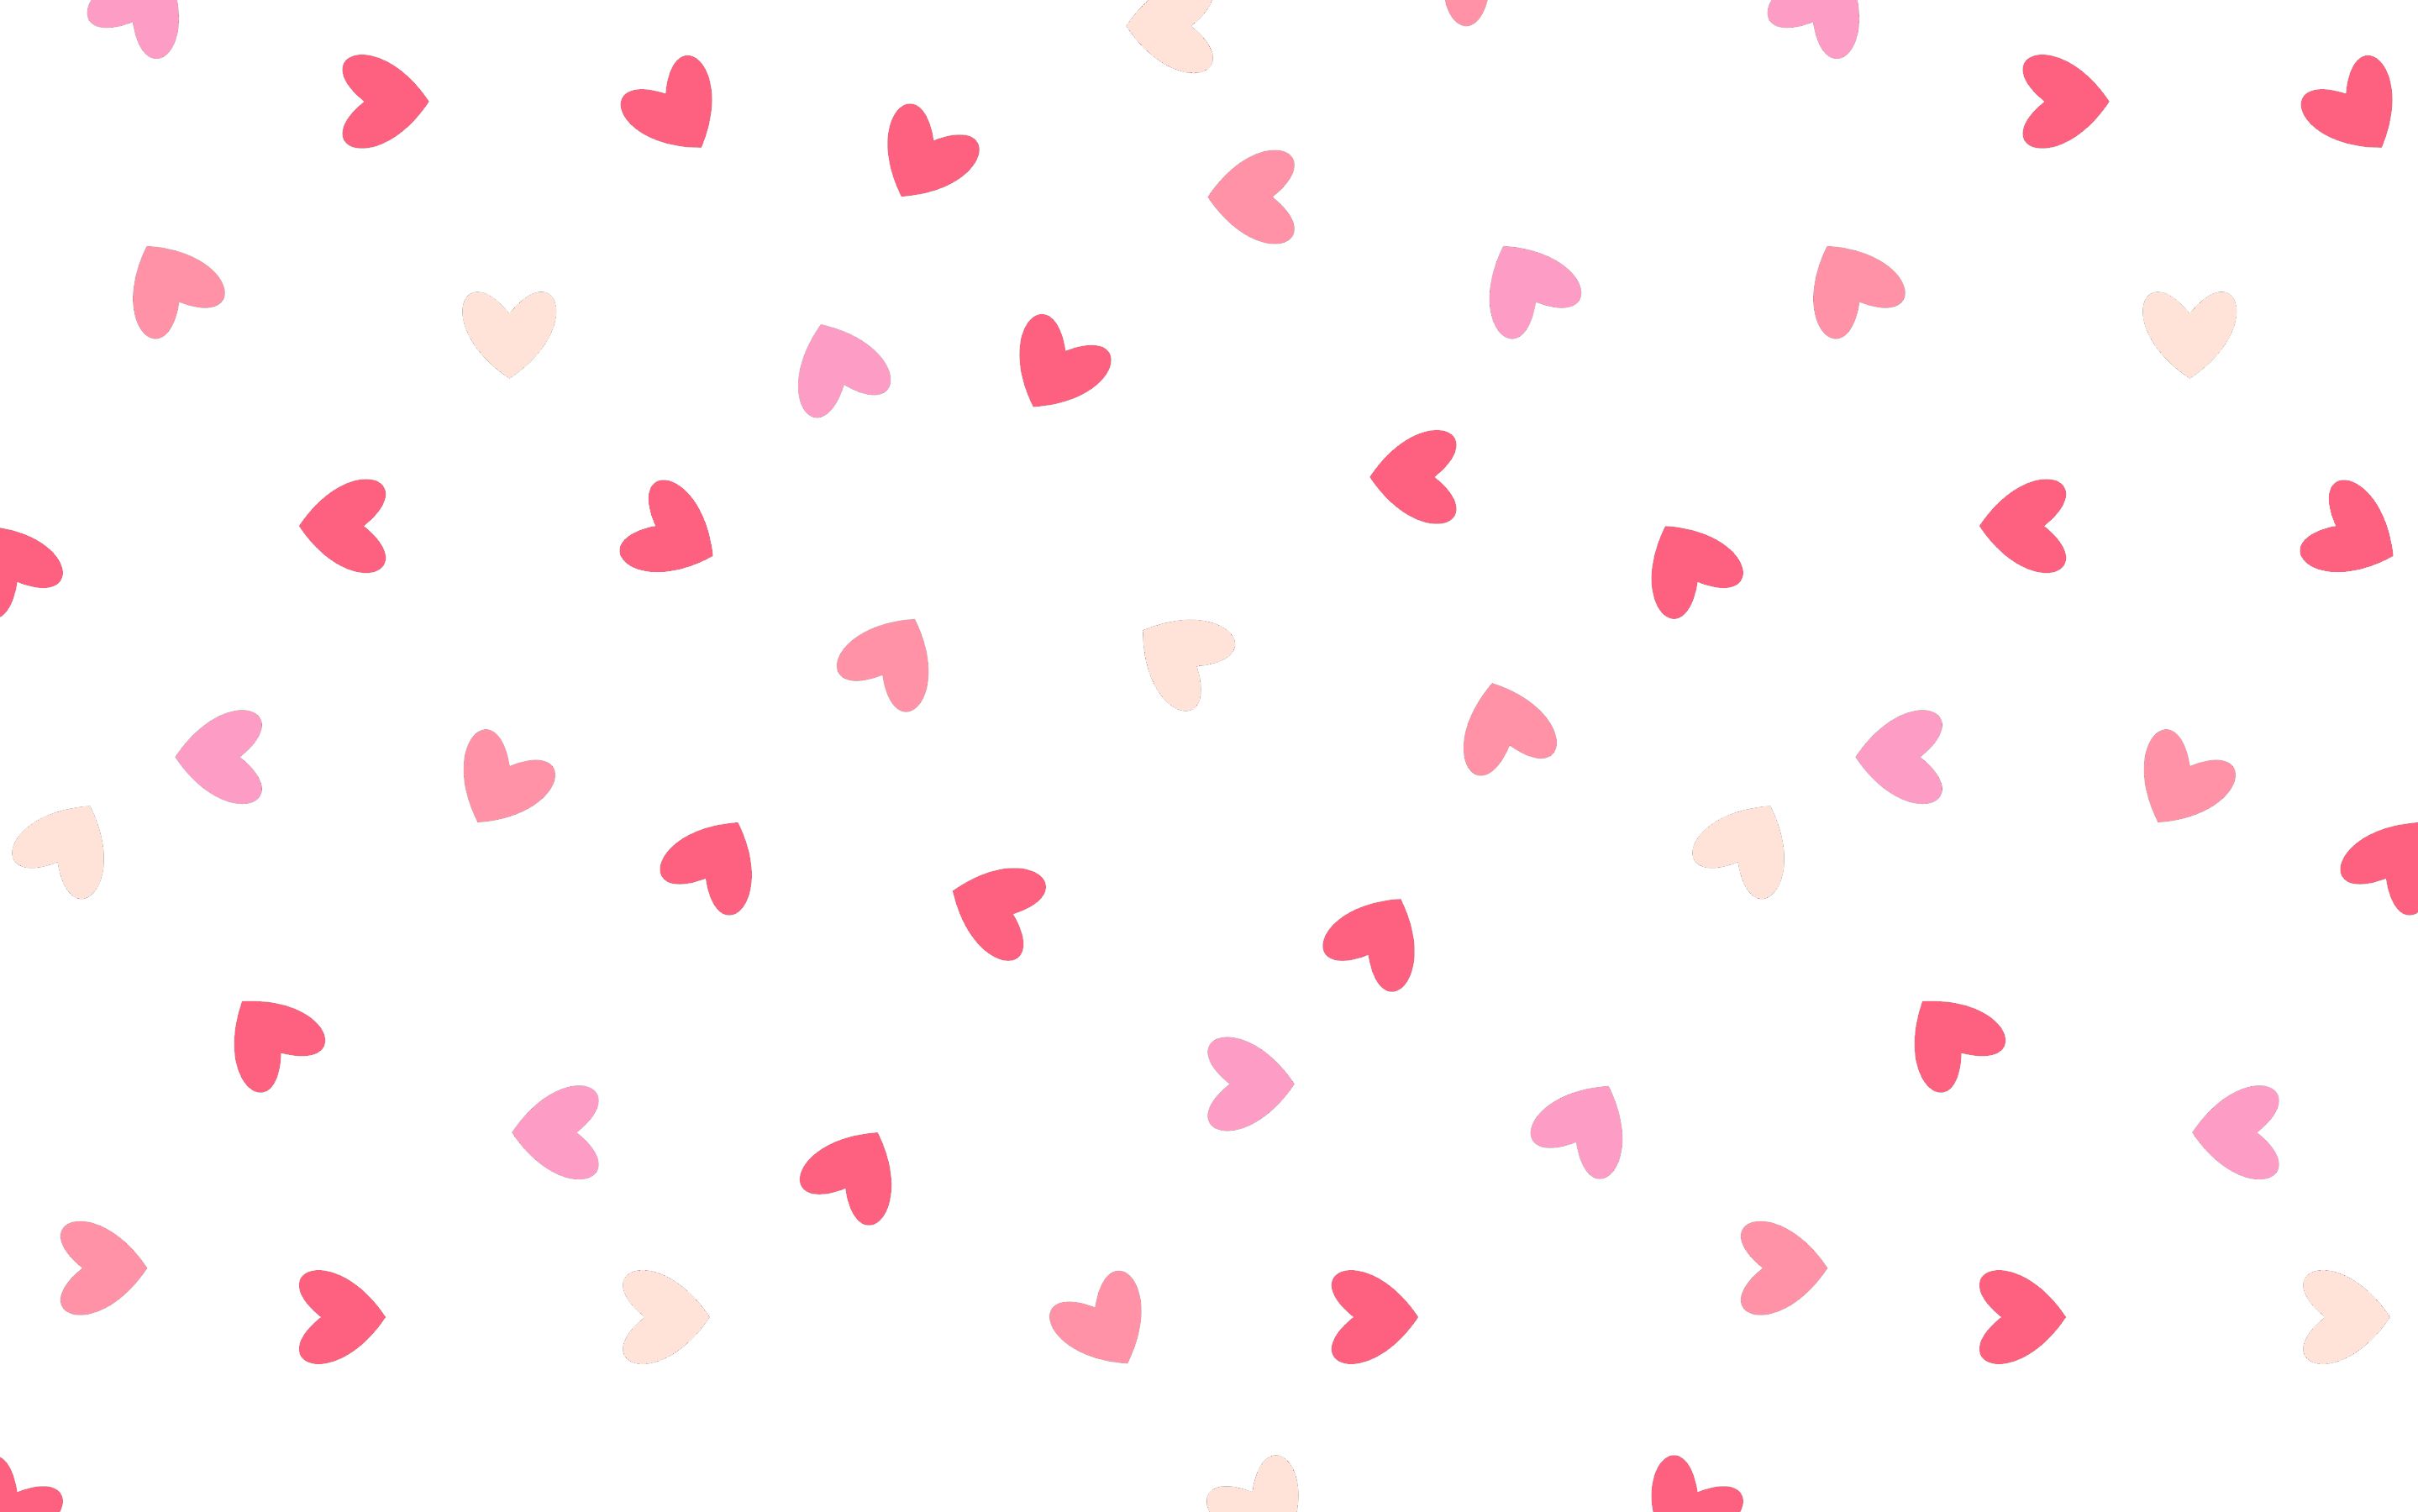 Pastel Valentines Day wallpaper Resolution 2878x1800 | Best Download this awesome wallpaper - Cool Wallpaper HD - CoolWallpaper-HD.com